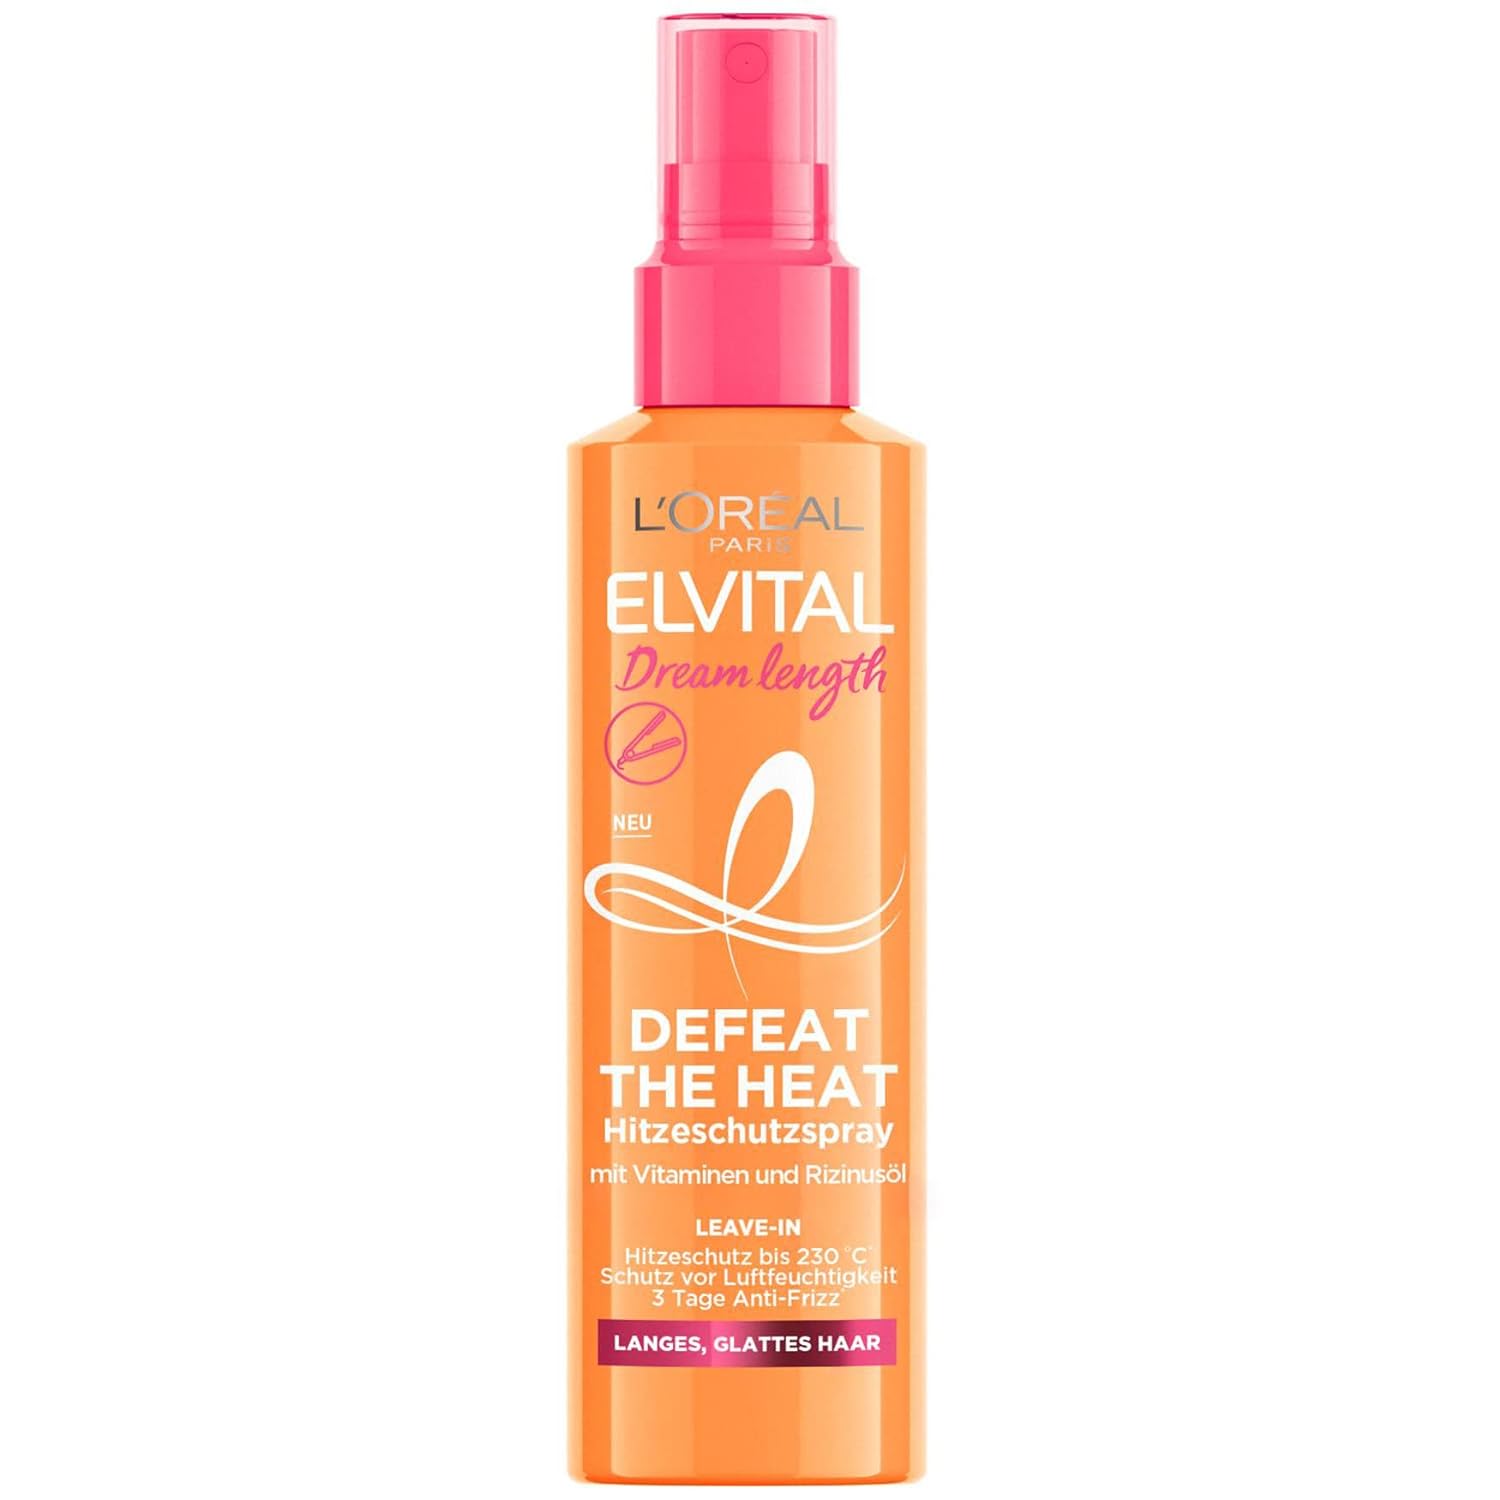 L'Oréal Paris Elvital Heat Protection Spray for Long, Straight Hair, Leave-In Hair Treatment Against Frizz, No Rinsing, With Vitamins and Castor Oil, Dream Length Defeat The Heat, 1 x 150 ml